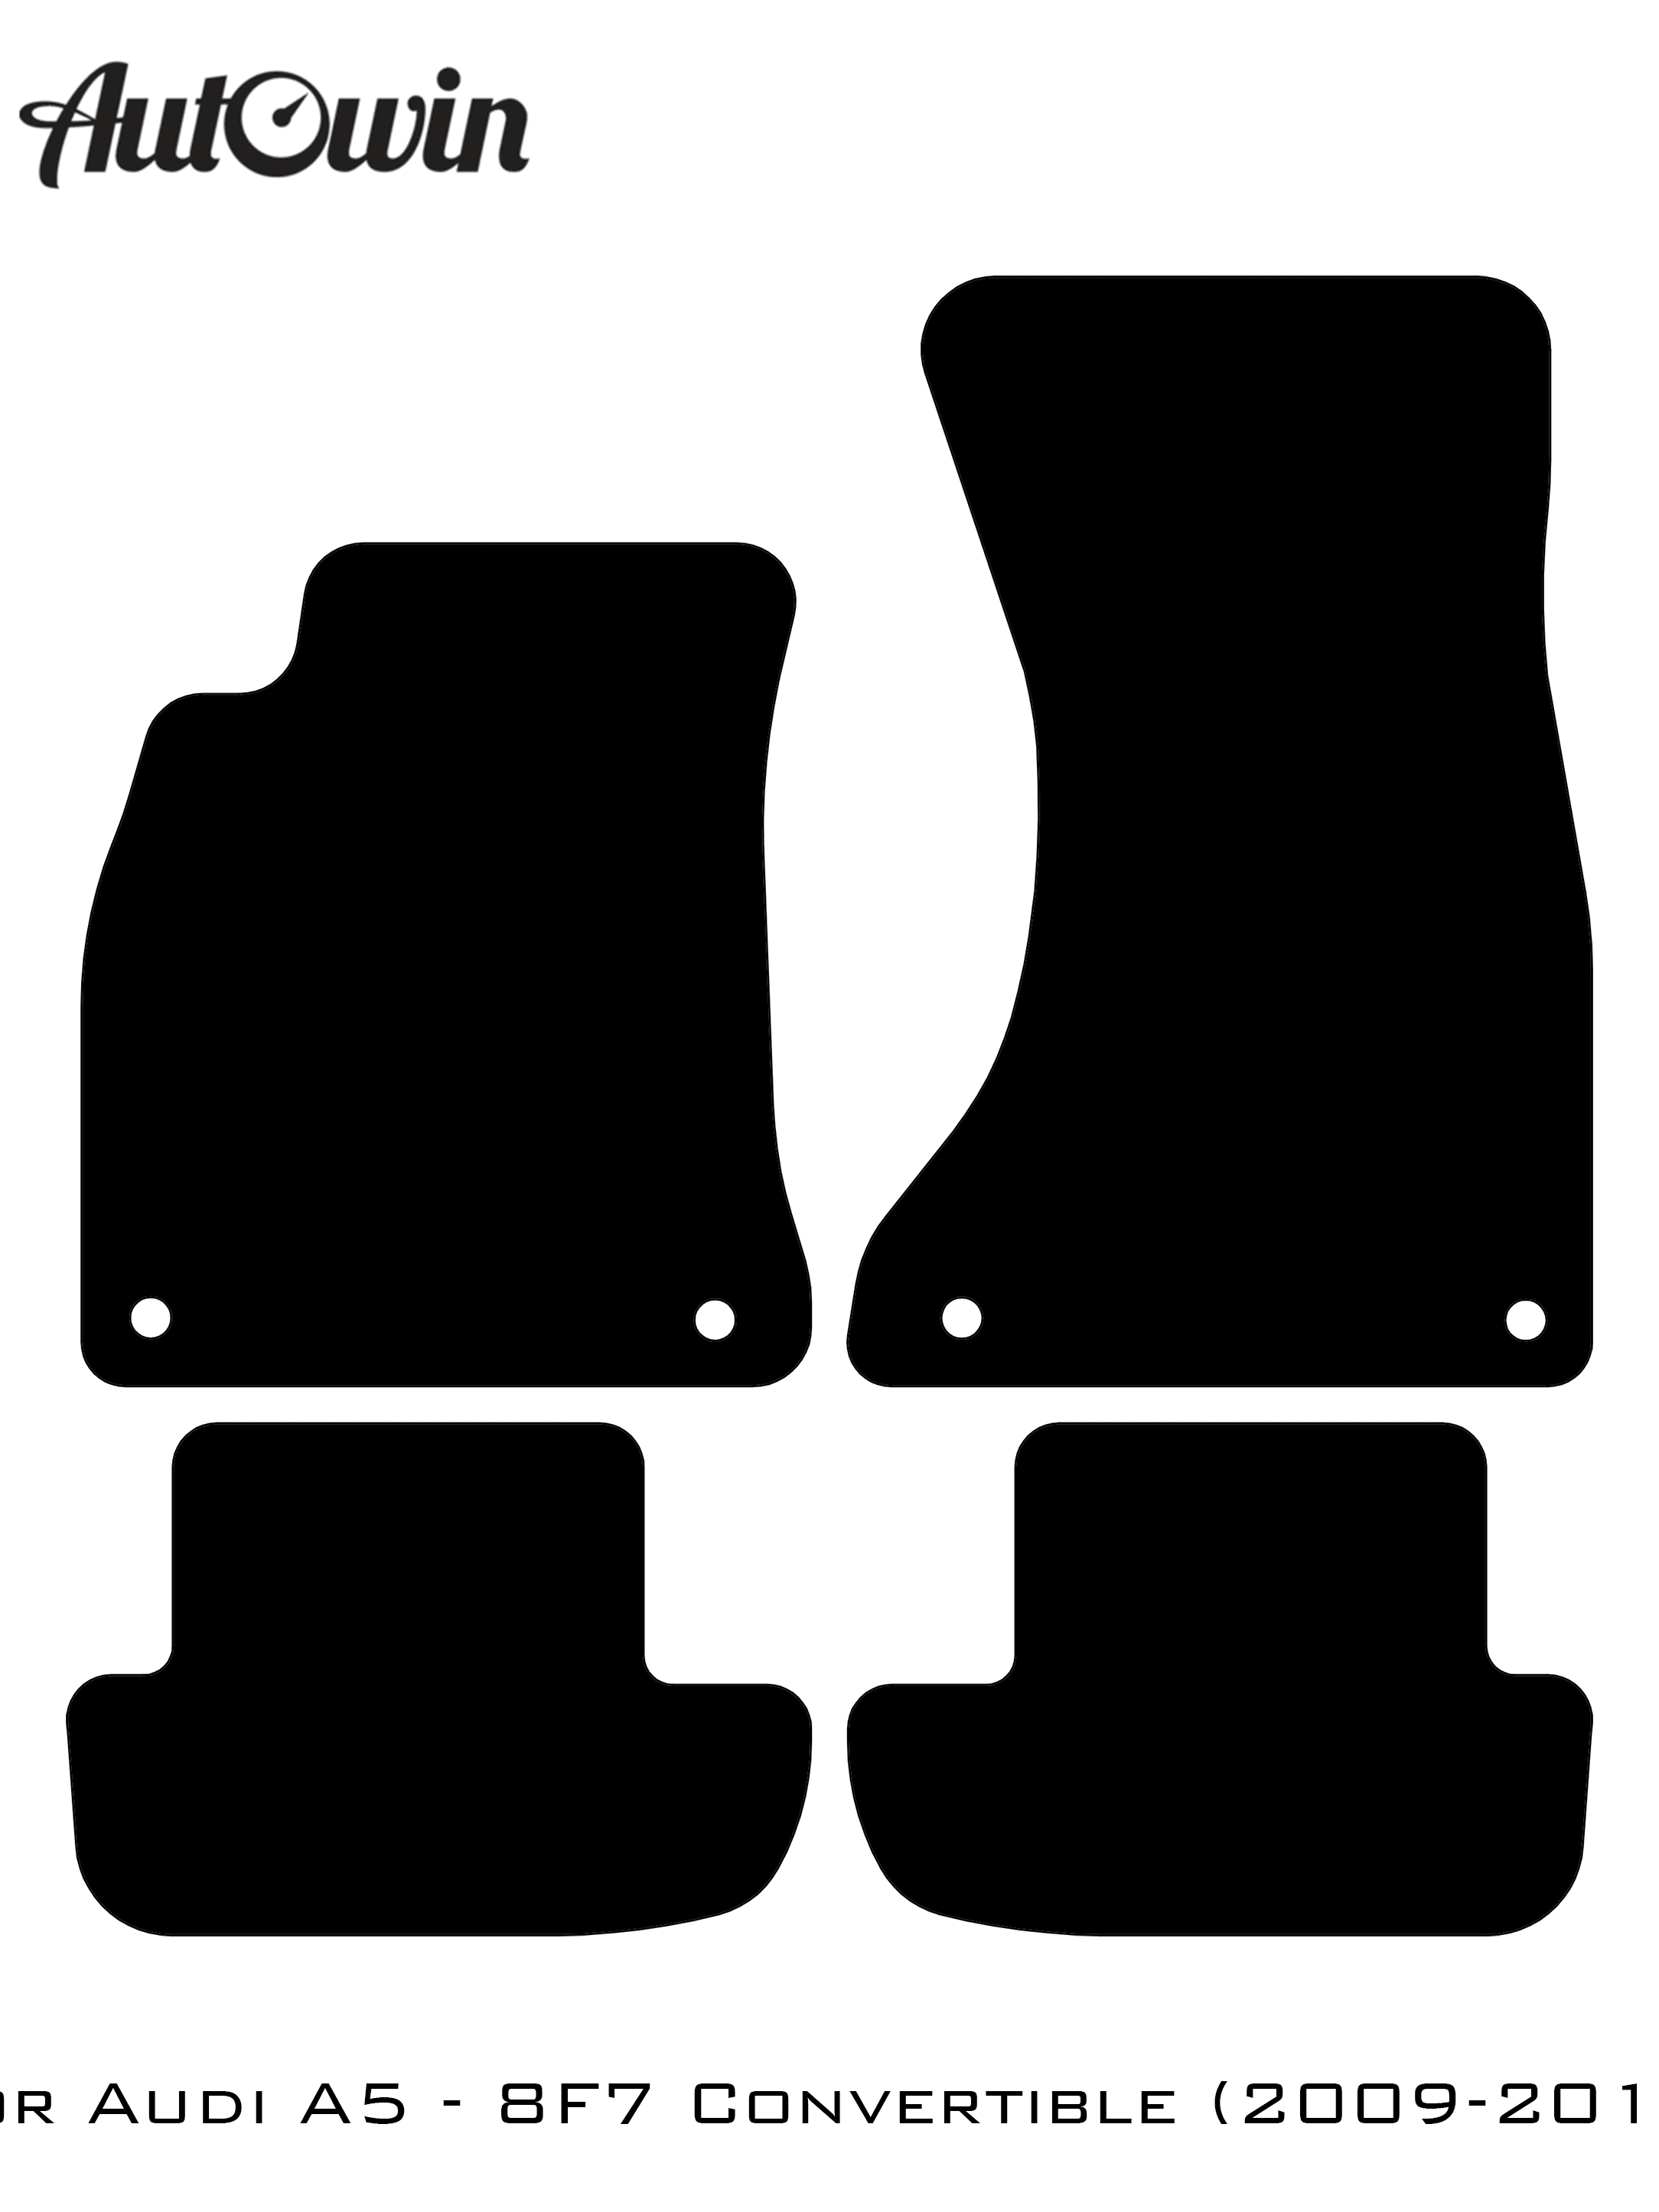 Floor Mats for Audi A5 - 8F7 Convertible (2009-2017) Fighter Jet Edition